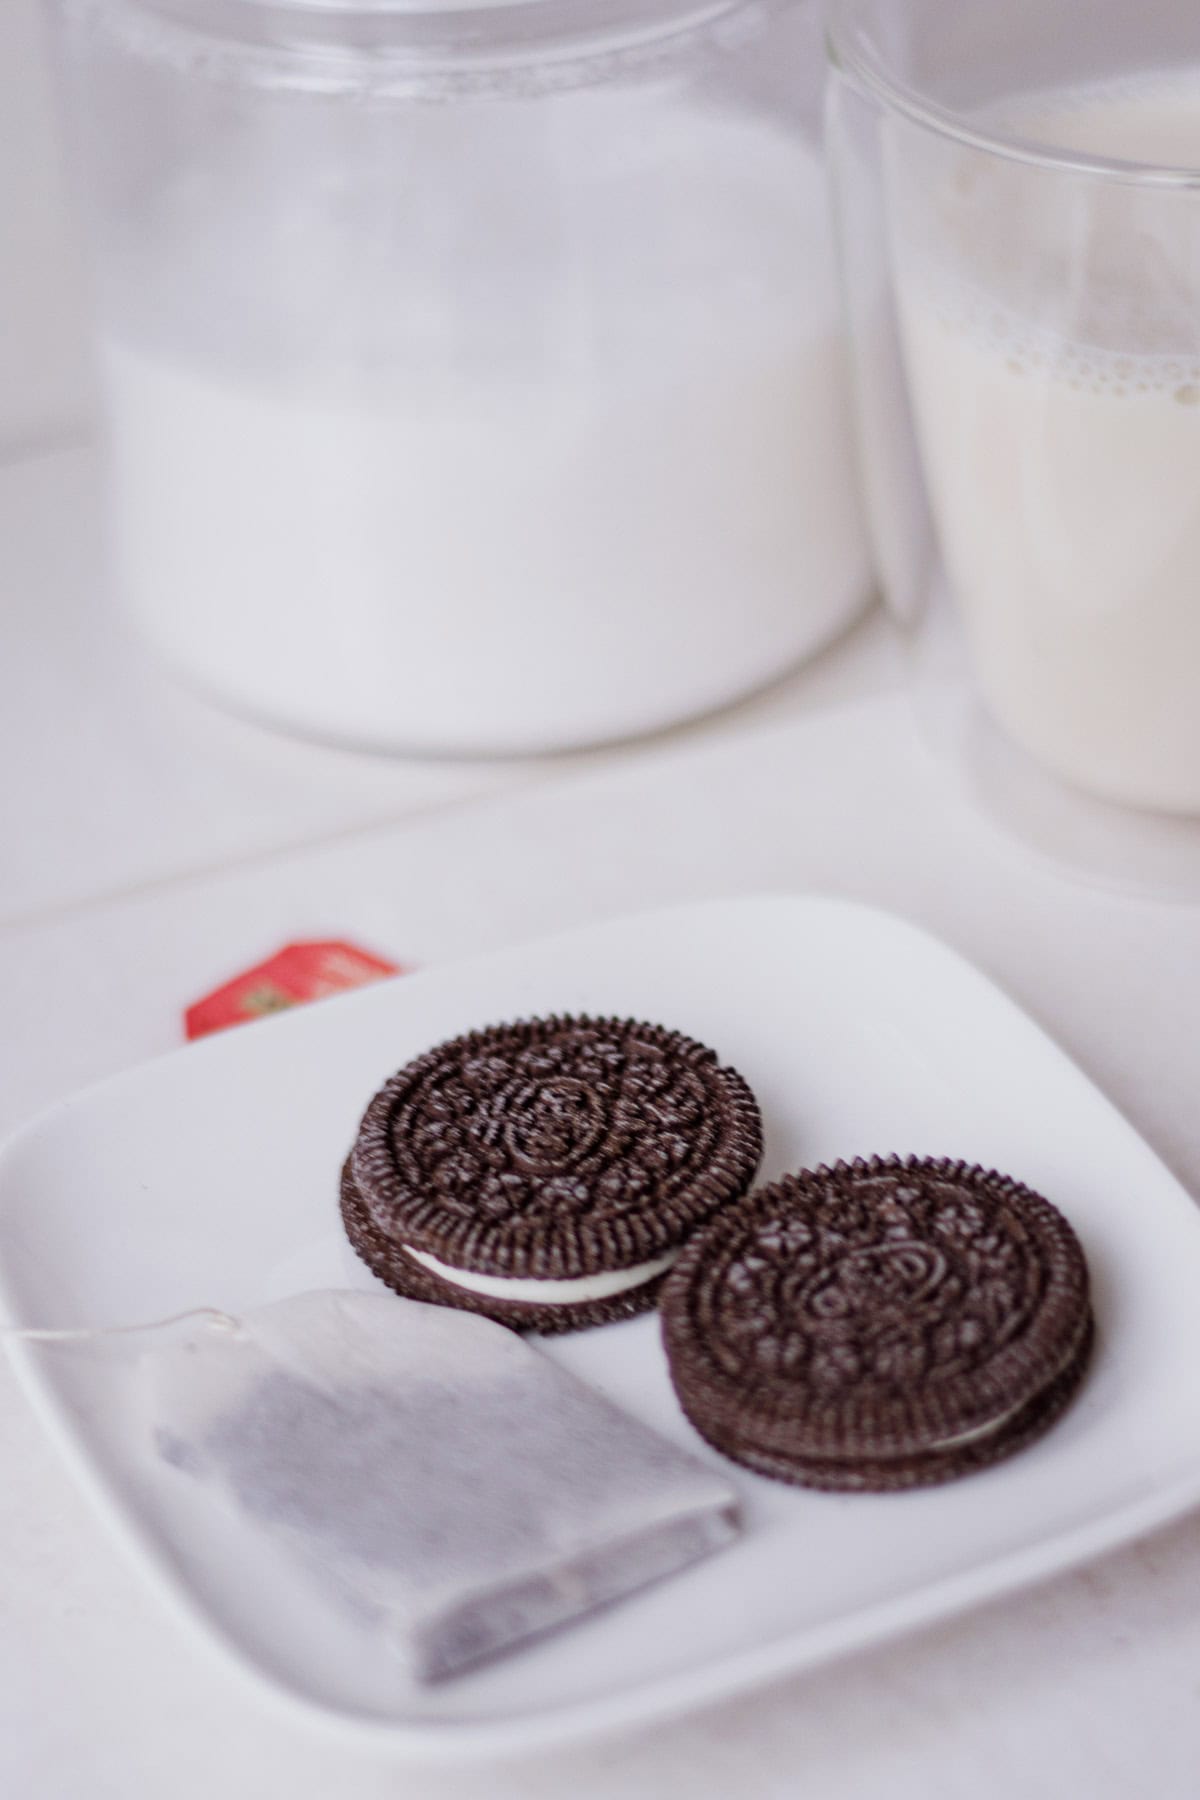 Overhead view of Oreos on a plate with a tea bag, with sugar and soy milk in the background.